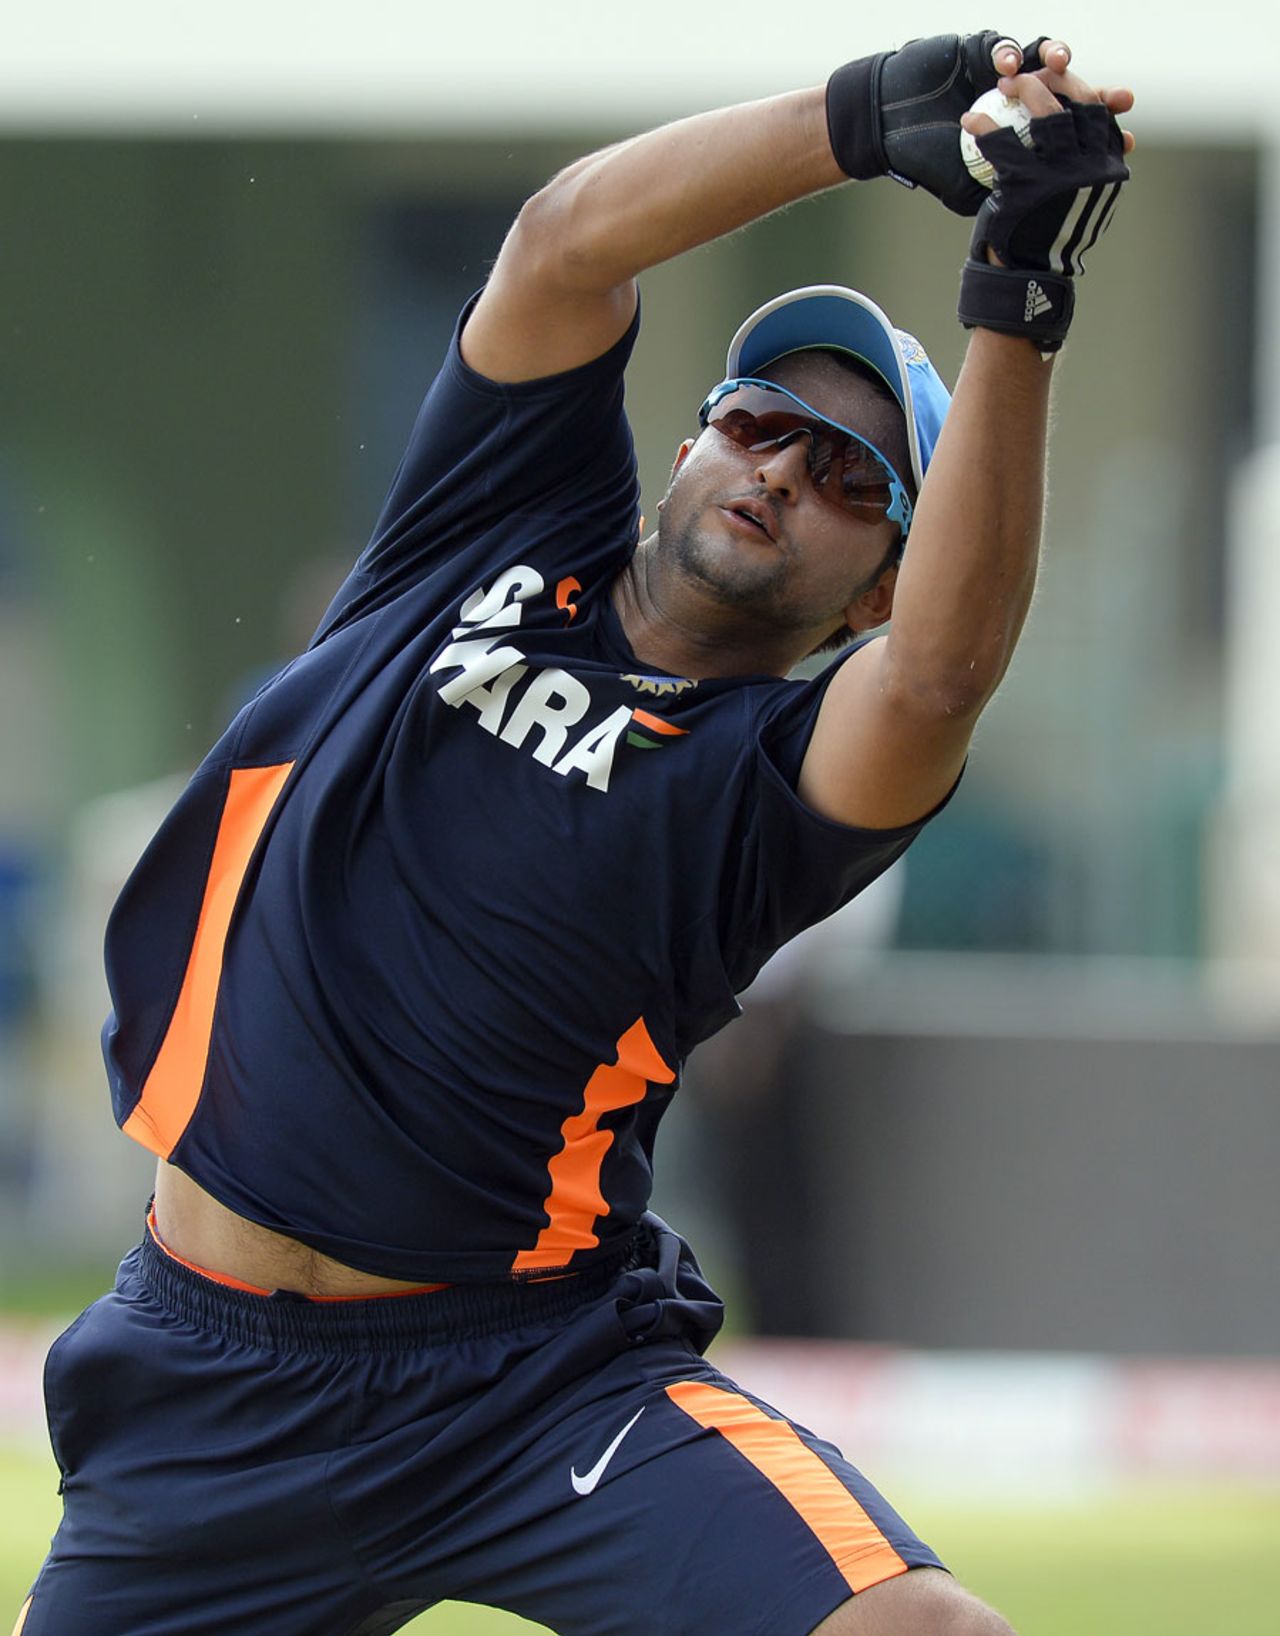 Suresh Raina takes a leaping catch during a practice session, West Indies v India, West Indies tri-series, Kingston, June 29, 2013